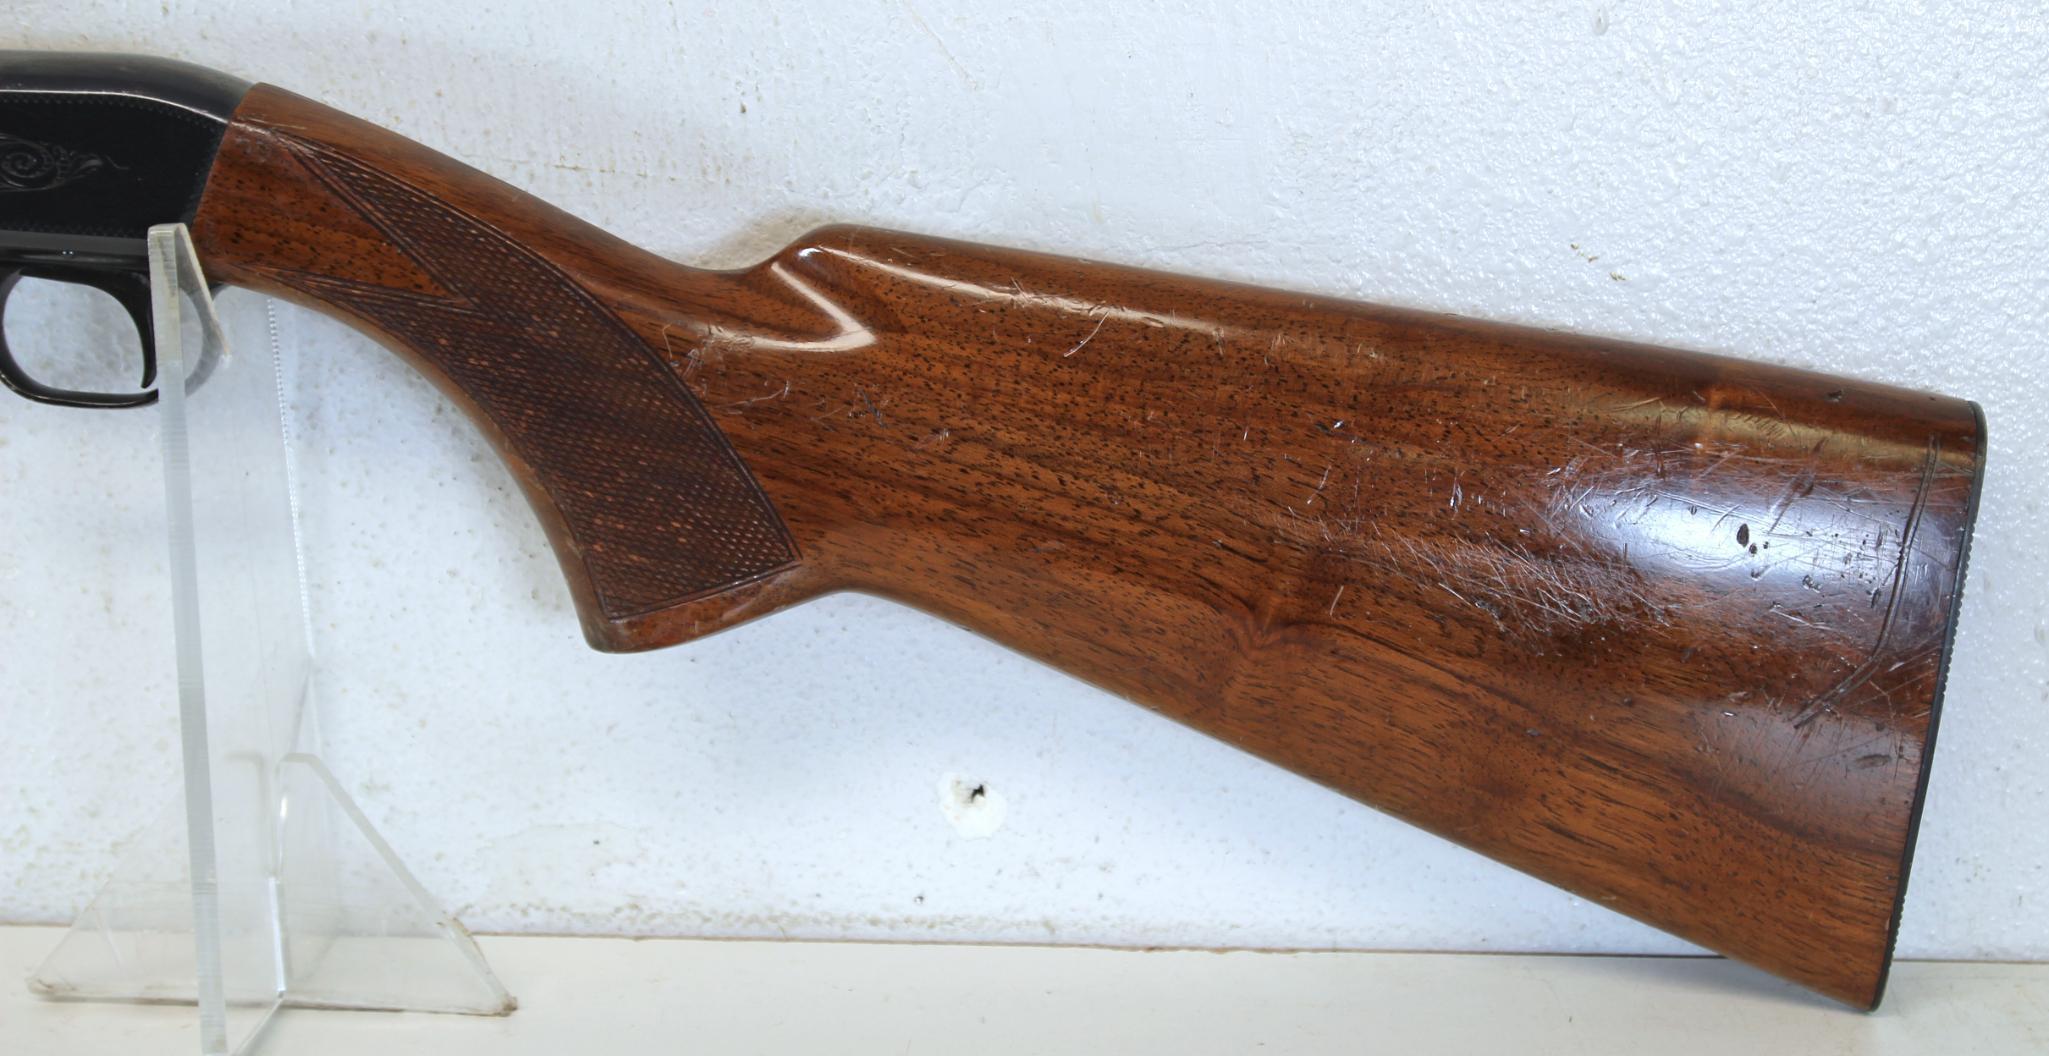 Browning Model SA-22 .22 LR Semi-Auto Rifle AIM Optic Rear Sight... Bumps and Rubs on Wood from Use.